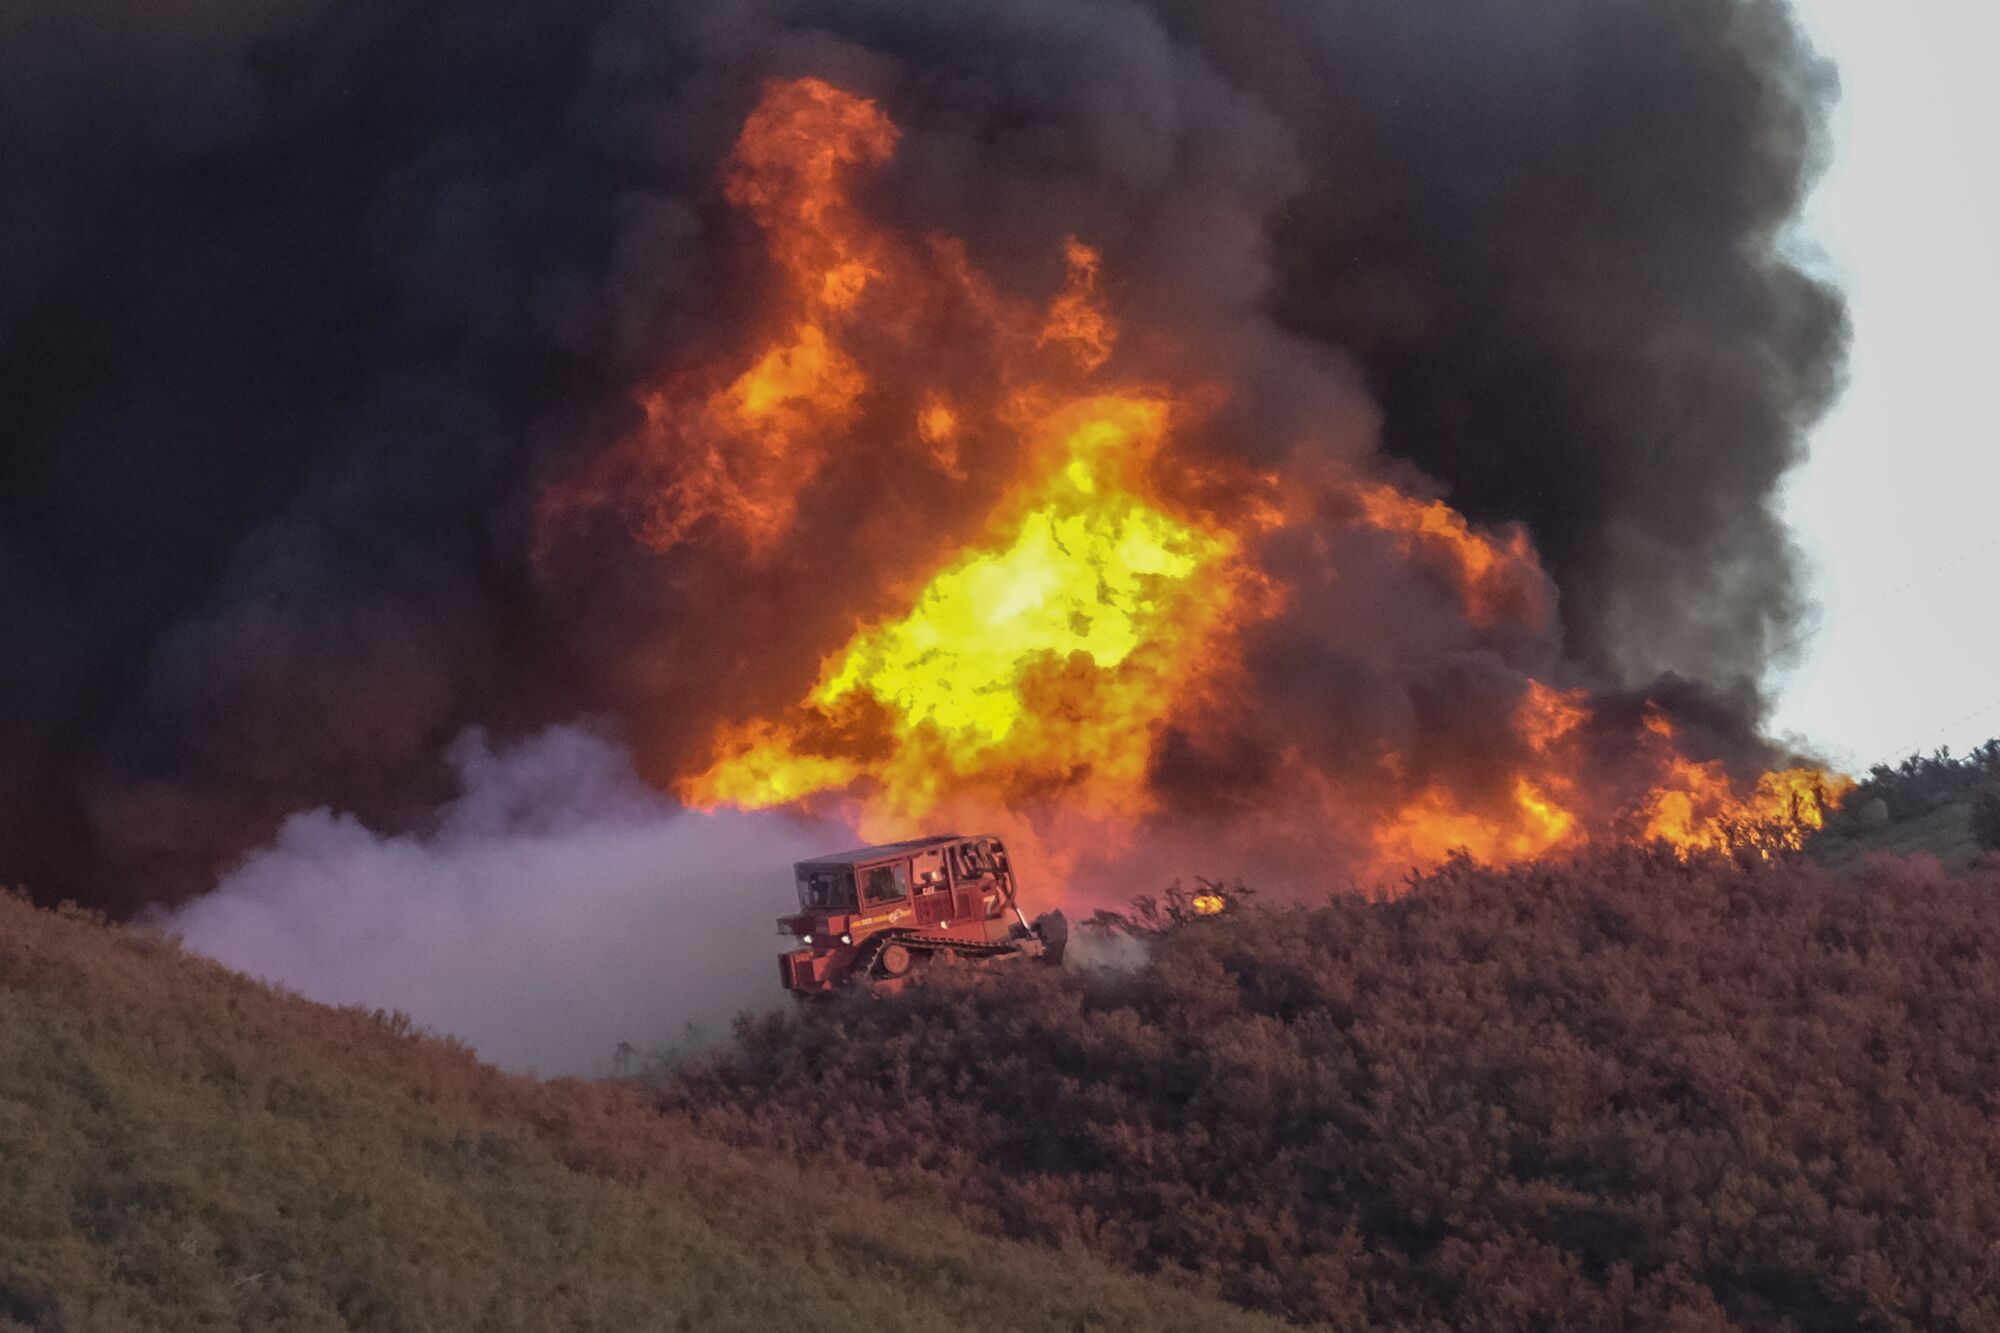 A bulldozer works to build a fire line while flames and smoke rise behind it.